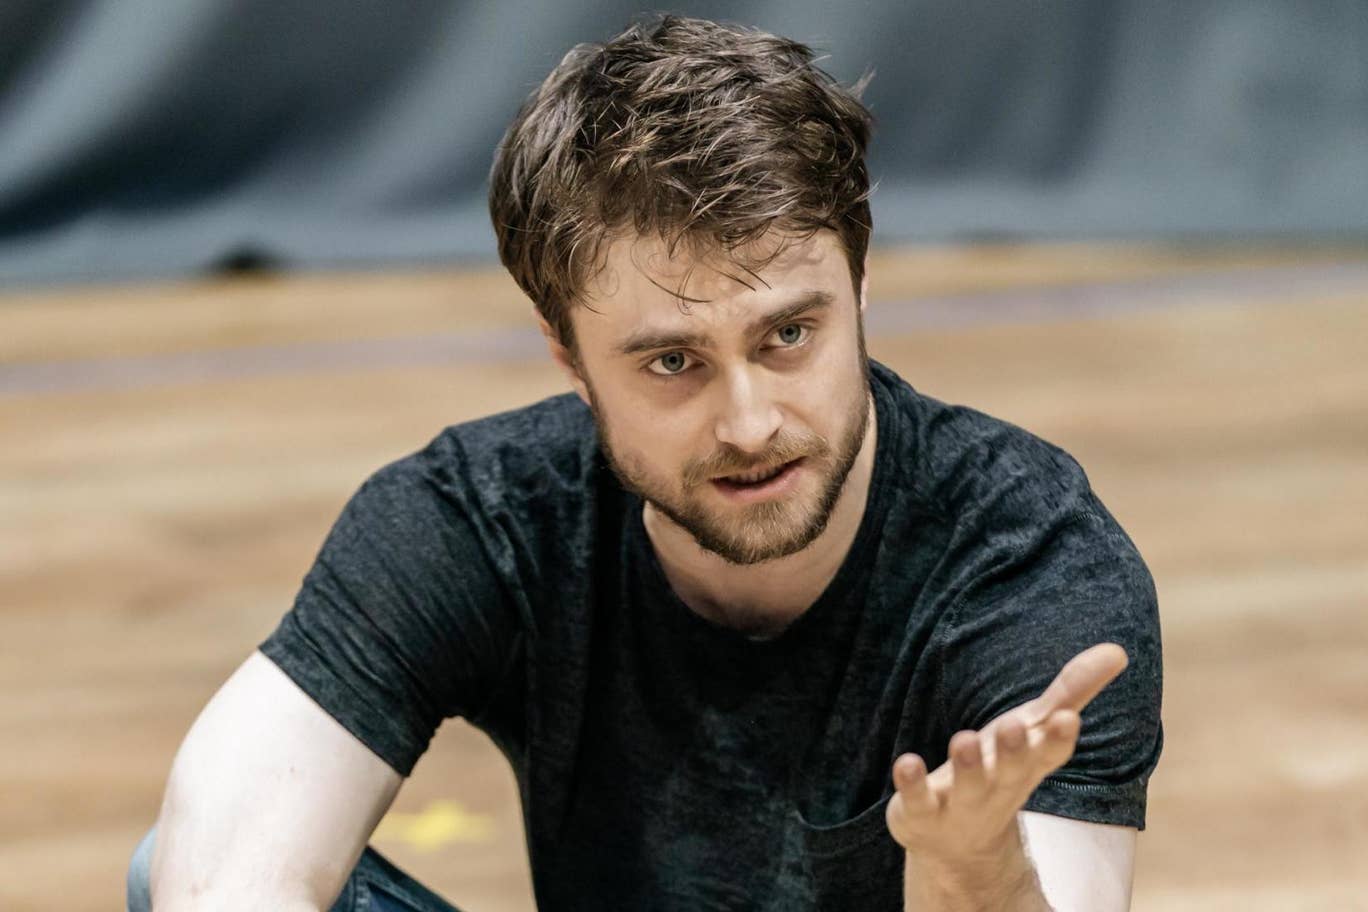 Daniel Radcliffe participates in a rehearsal for his upcoming production of "Endgame".